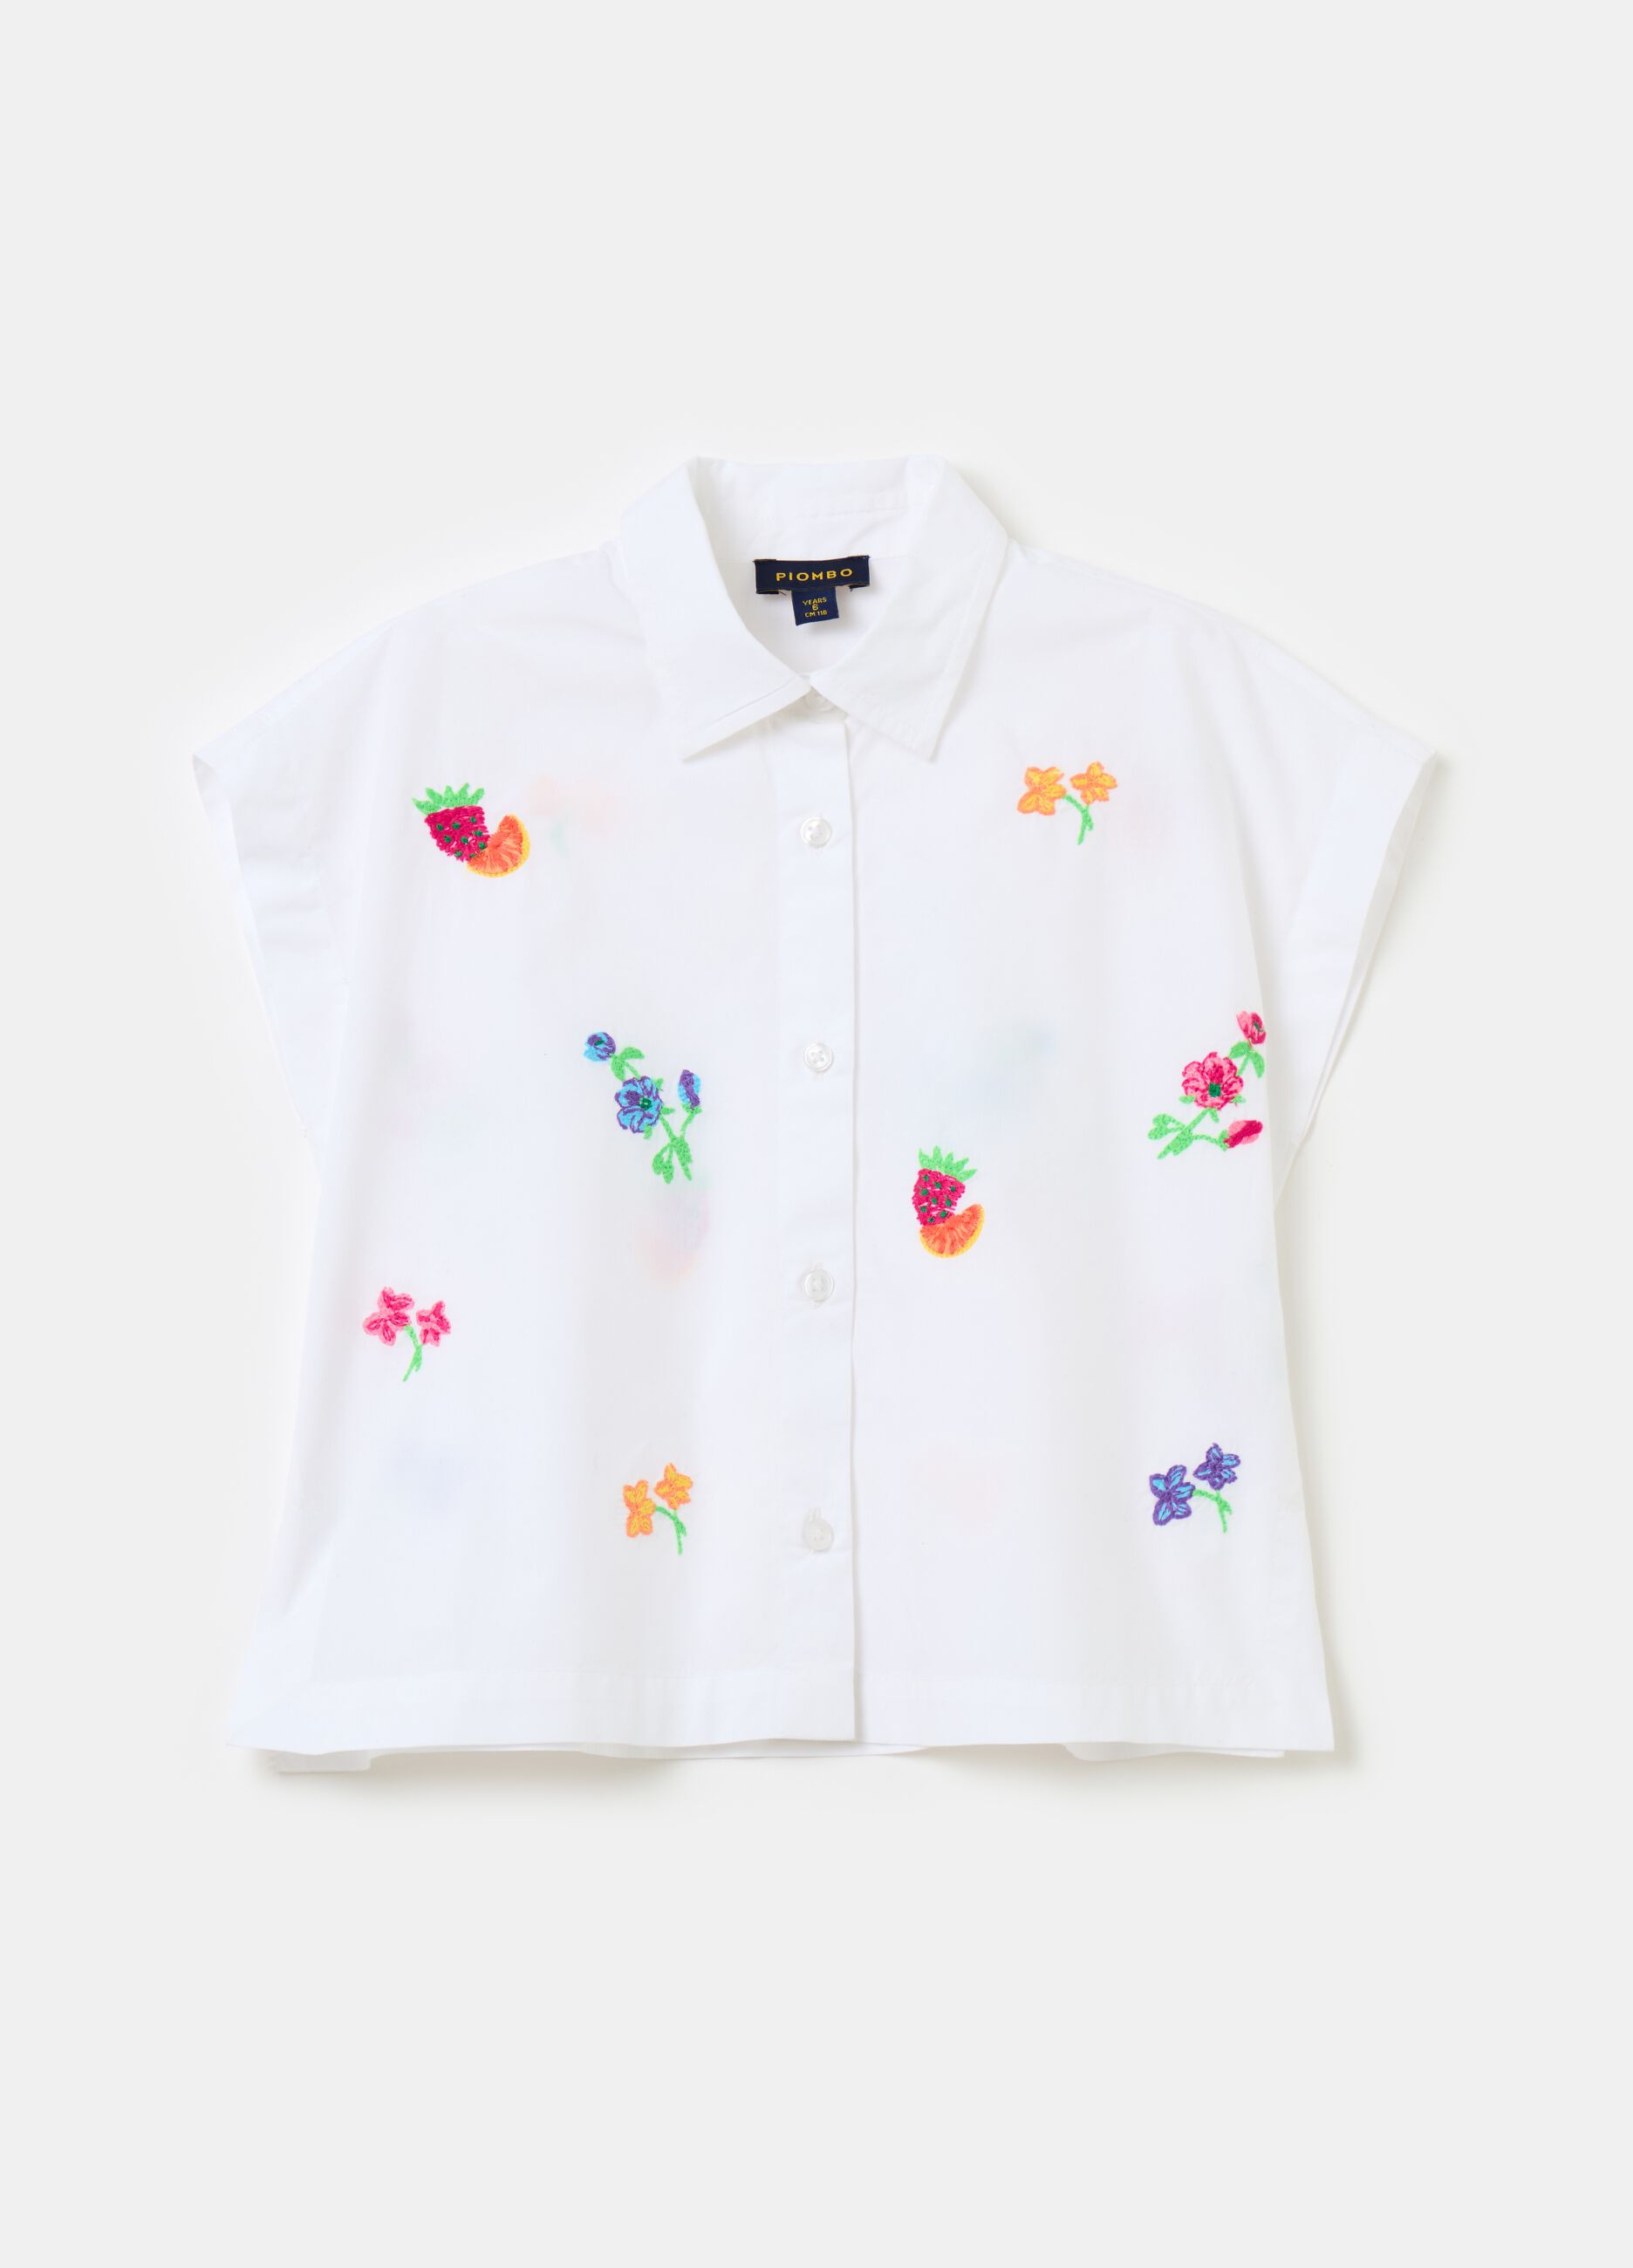 Cotton shirt with fruit and flowers embroidery